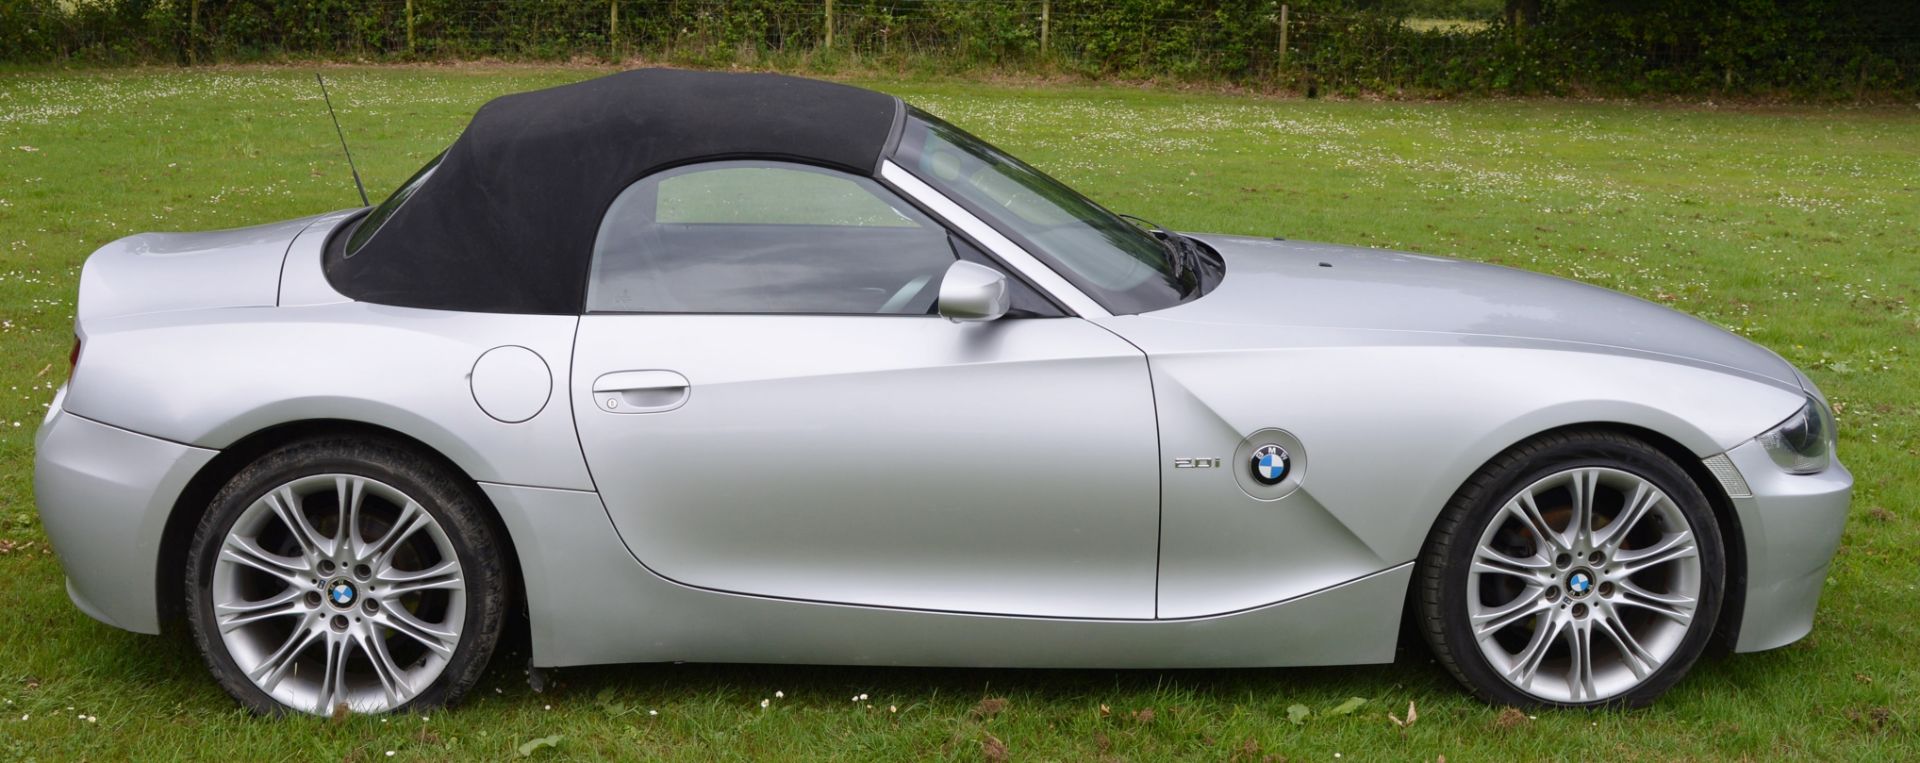 1 x BMW M Sport Convertible Z4 2.0i - 2008 58 Plate - 54,000 Miles - Silver Finish - Power Roof - - Image 12 of 47